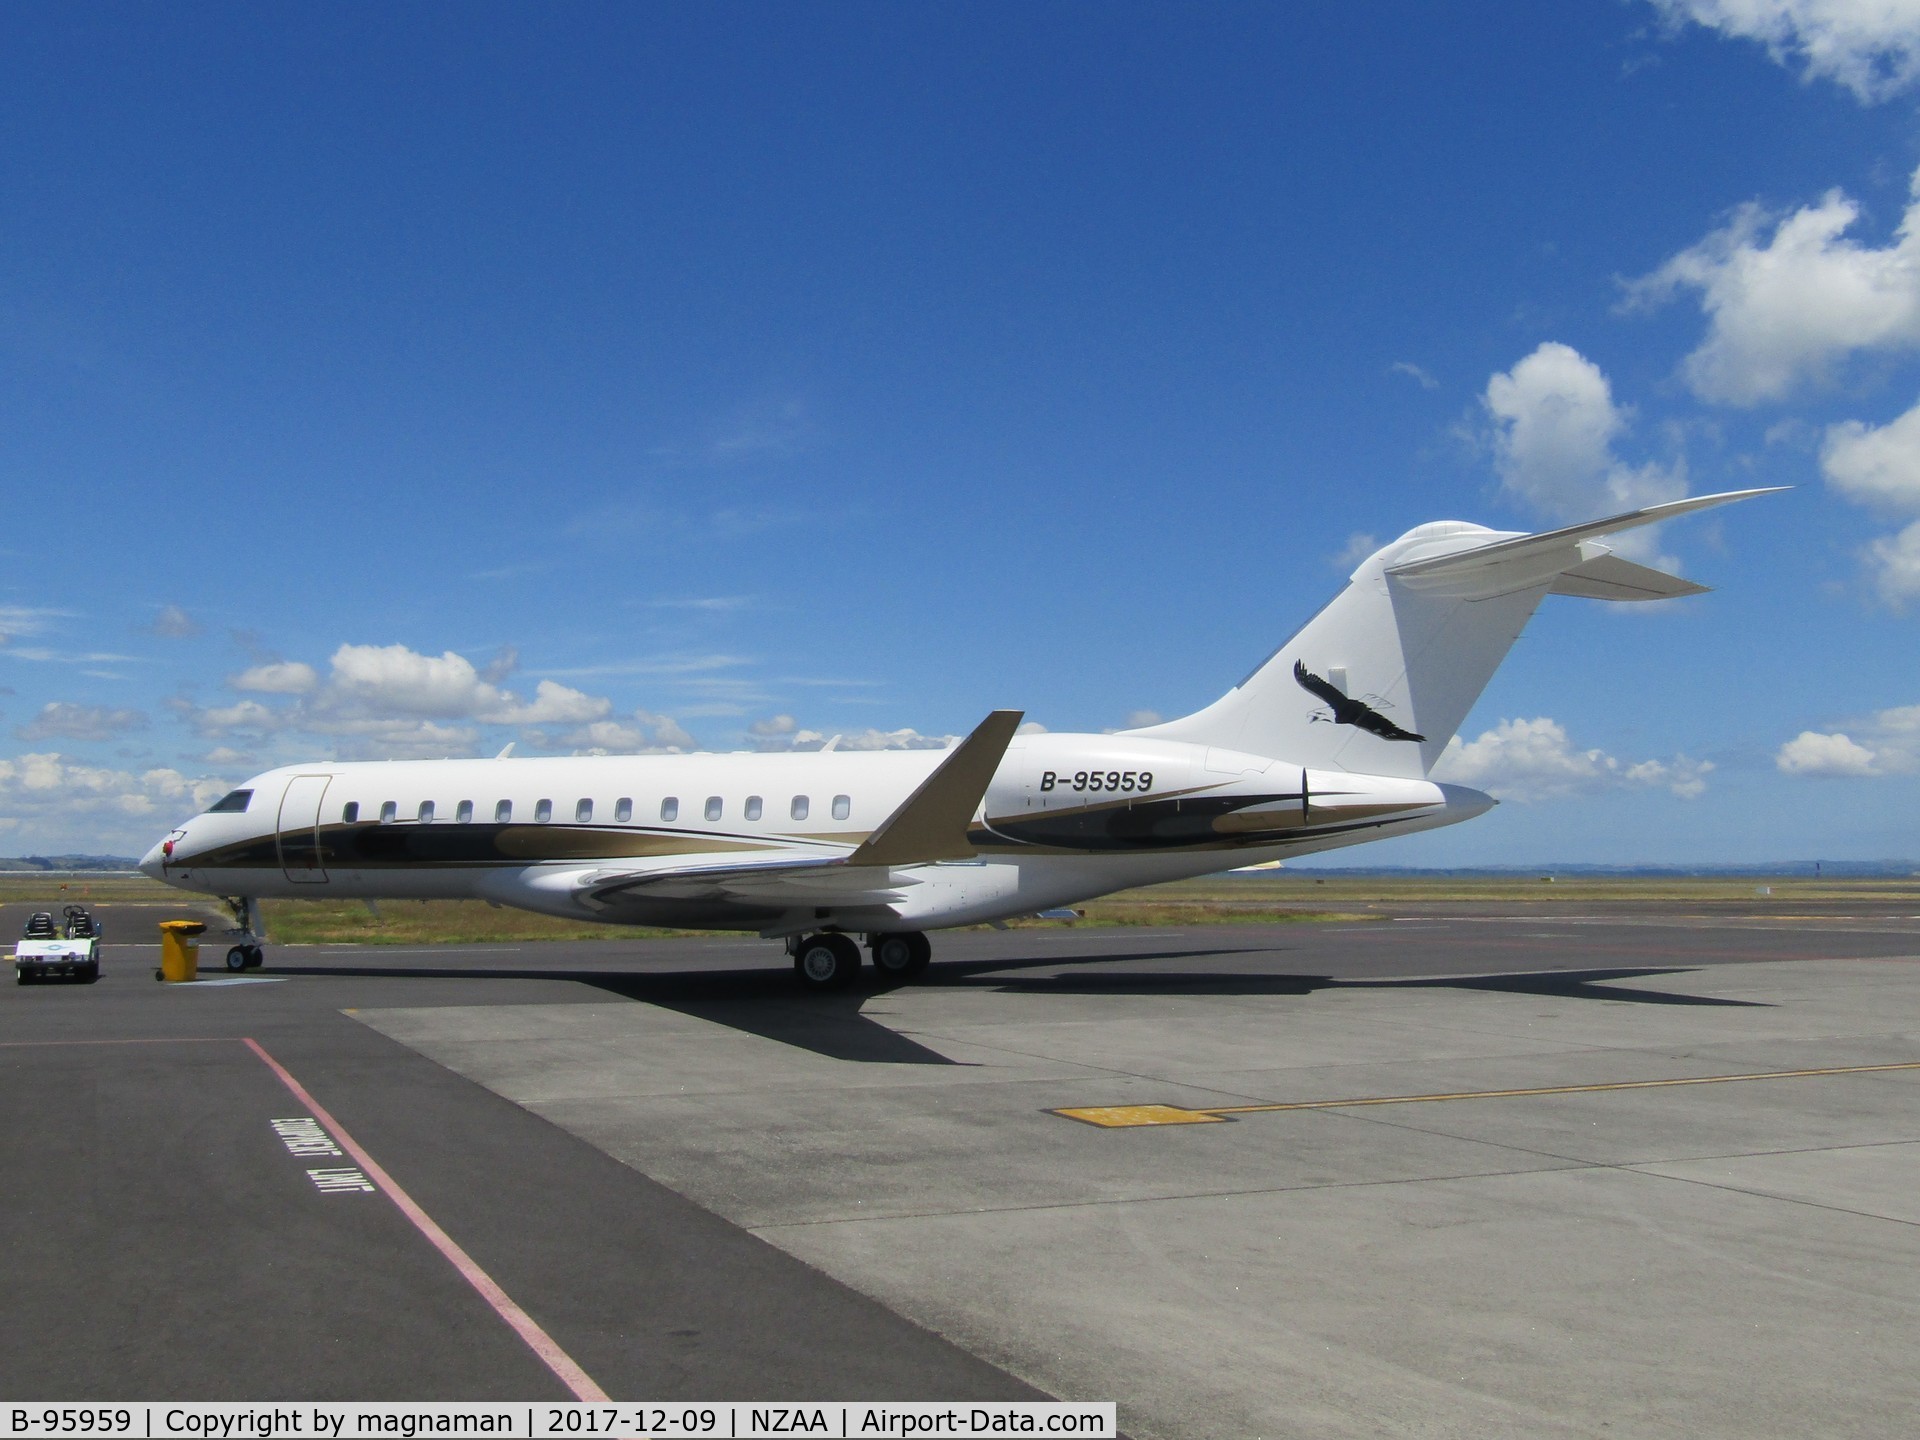 B-95959, 2009 Bombardier BD-700-1A10 Global Express XRS C/N 9357, Last saw here in 2013 - nice to be back